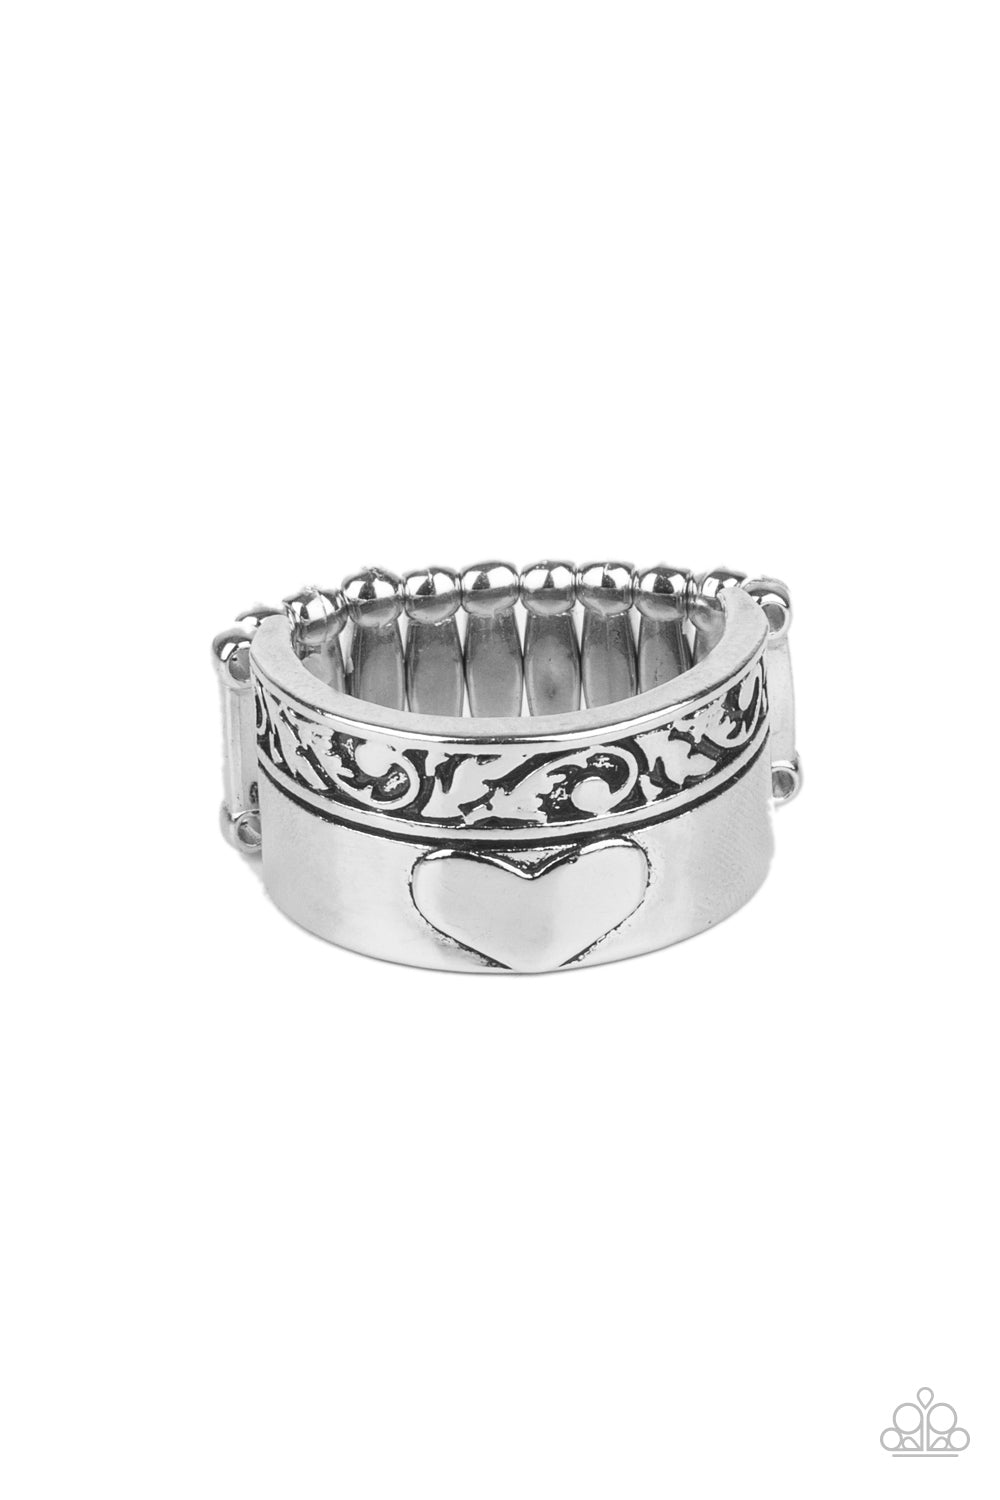 Garden Romance Silver Ring - Paparazzi Accessories  Bordered in a leafy embossed trim, a thick silver band is embossed in a heart for a vintage inspired look. Features a stretchy band for a flexible fit.  All Paparazzi Accessories are lead free and nickel free!  Sold as one individual ring.